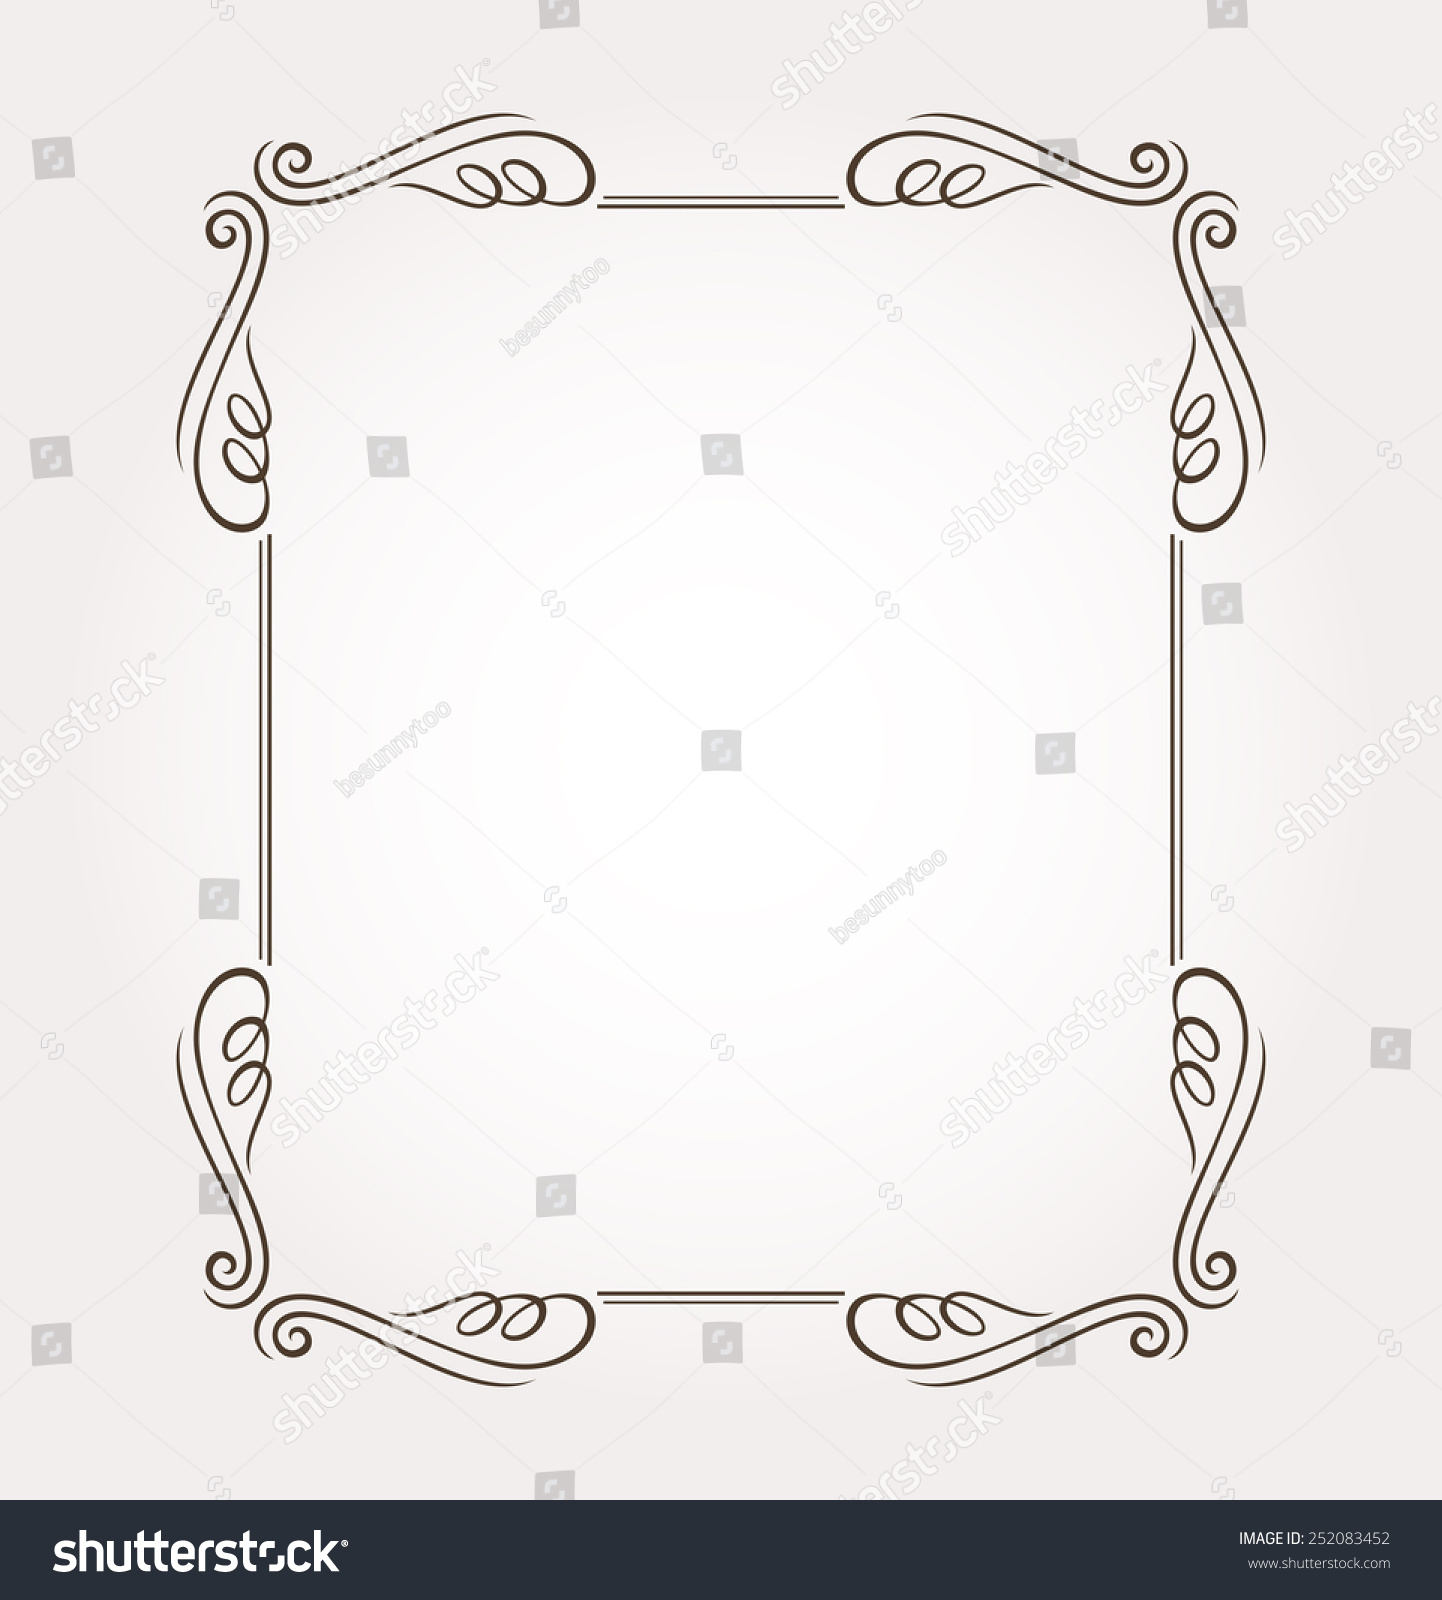 Fancy Frame Page Decoration Vector Illustration Stock Vector 252083452